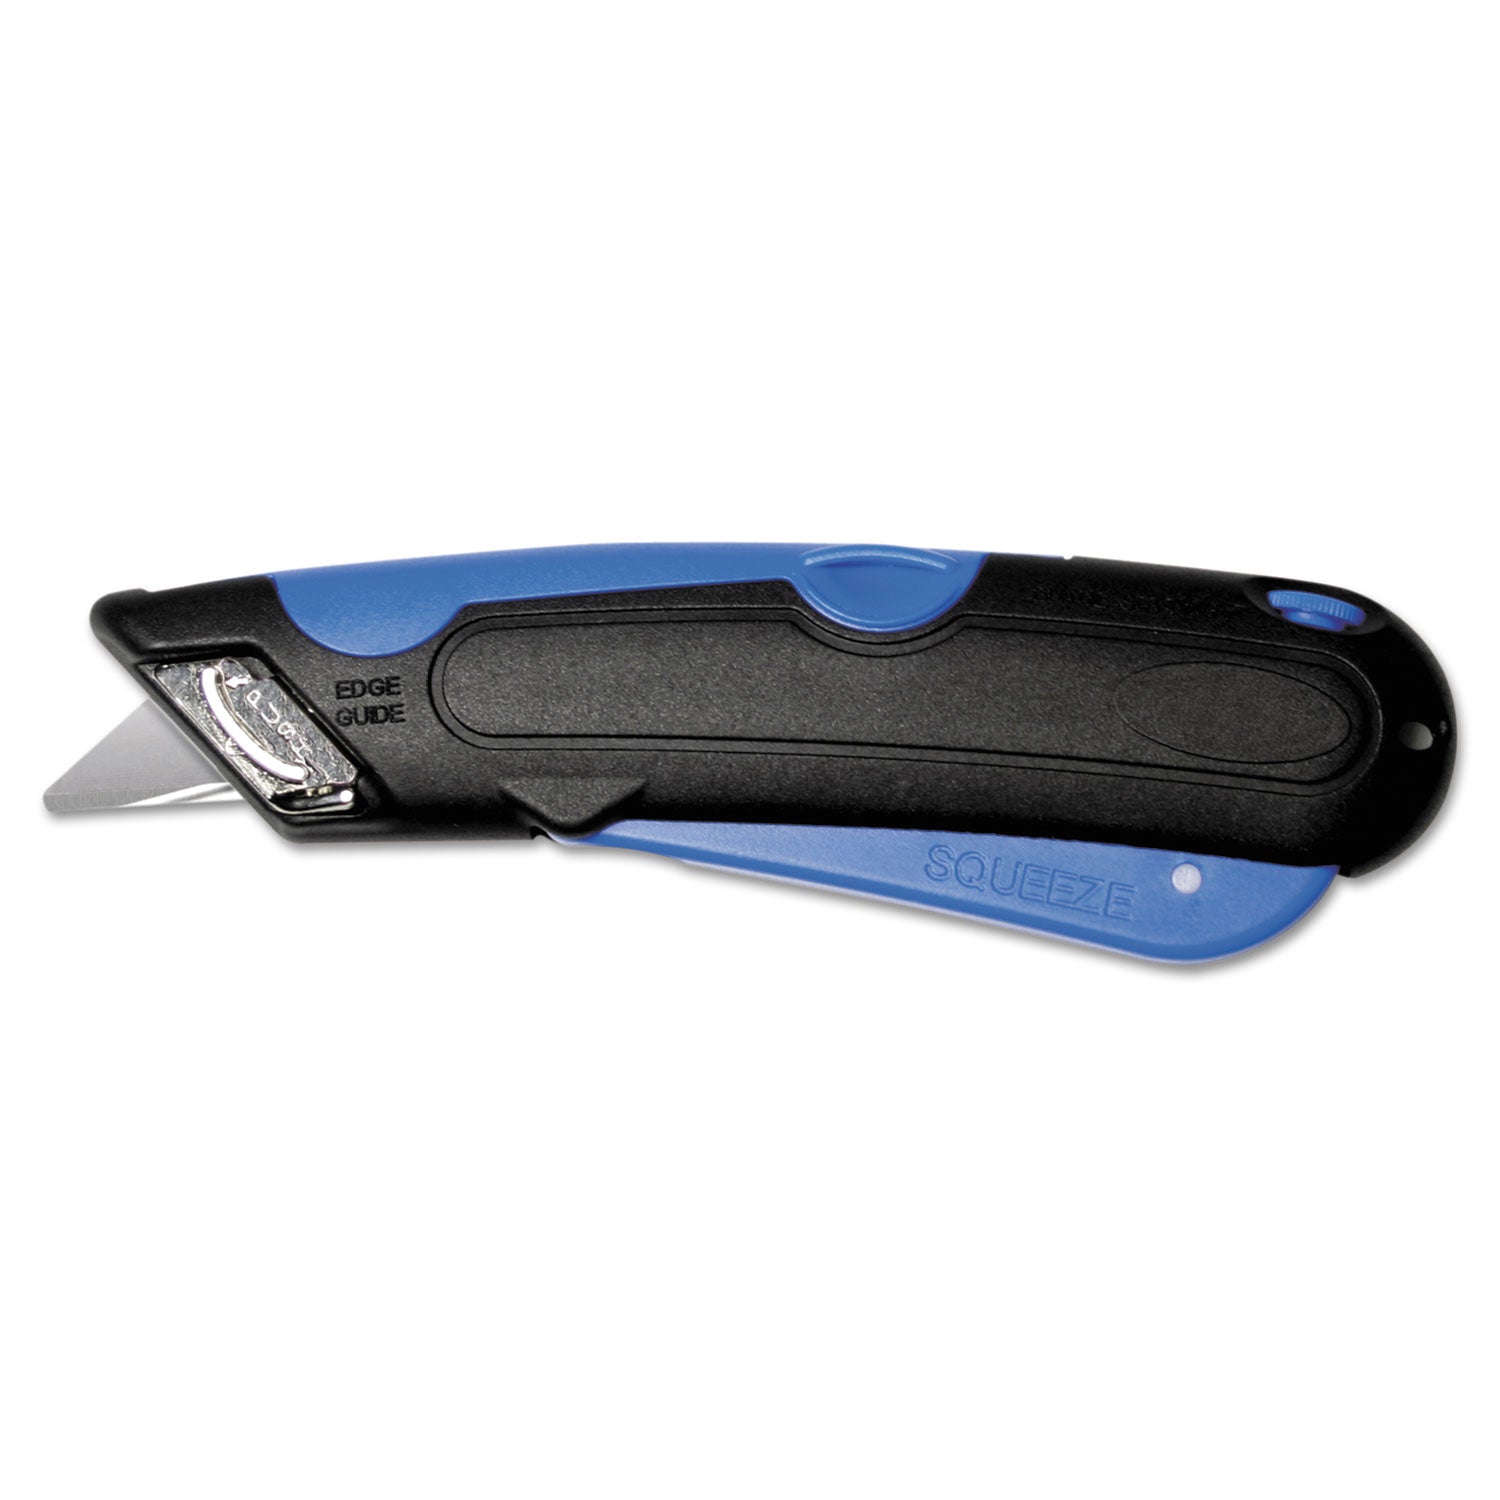 Easycut Cutter Knife w/Self-Retracting Safety-Tipped Blade, 6" Plastic Handle, Black/Blue - 